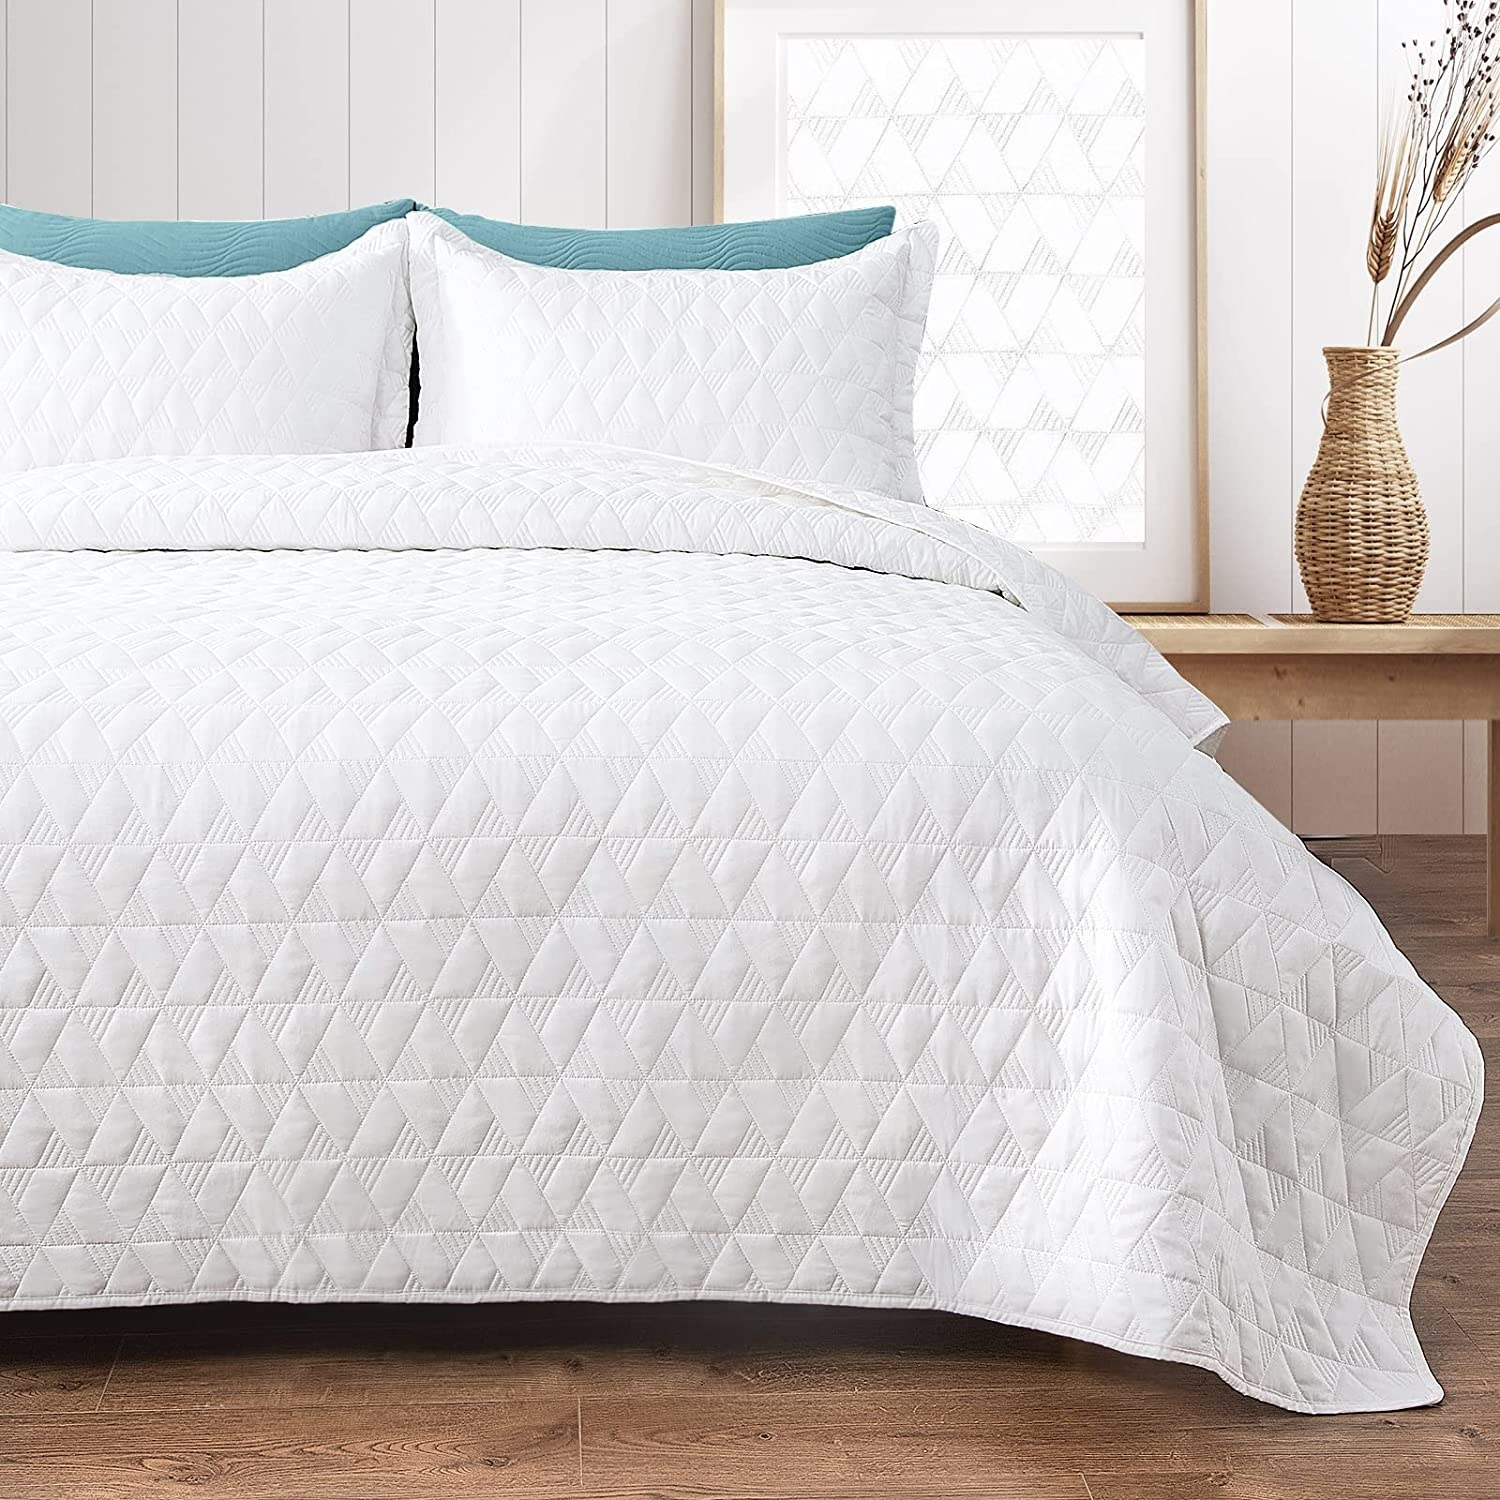 the quilted bedspread on a neatly made-up bed